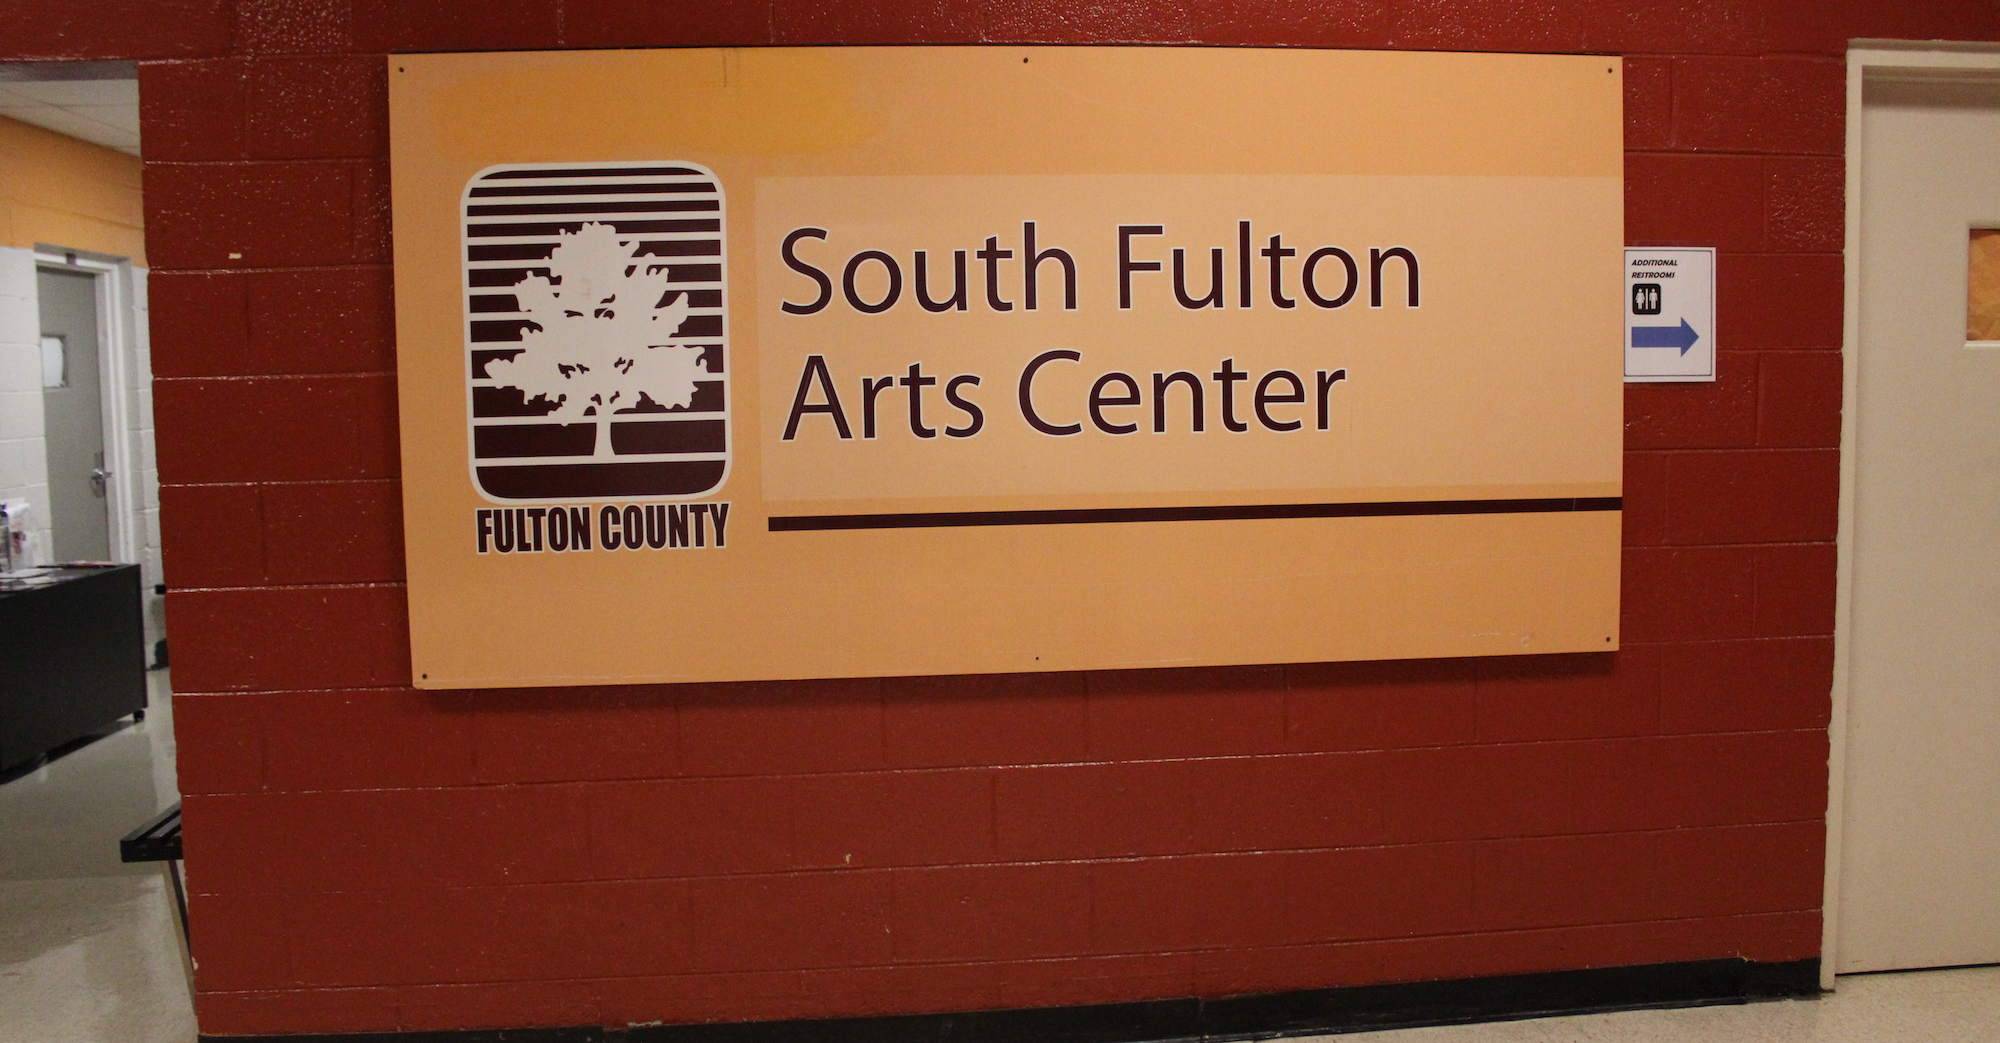 City of South Fulton Acquiring South Fulton, Southwest Arts Centers